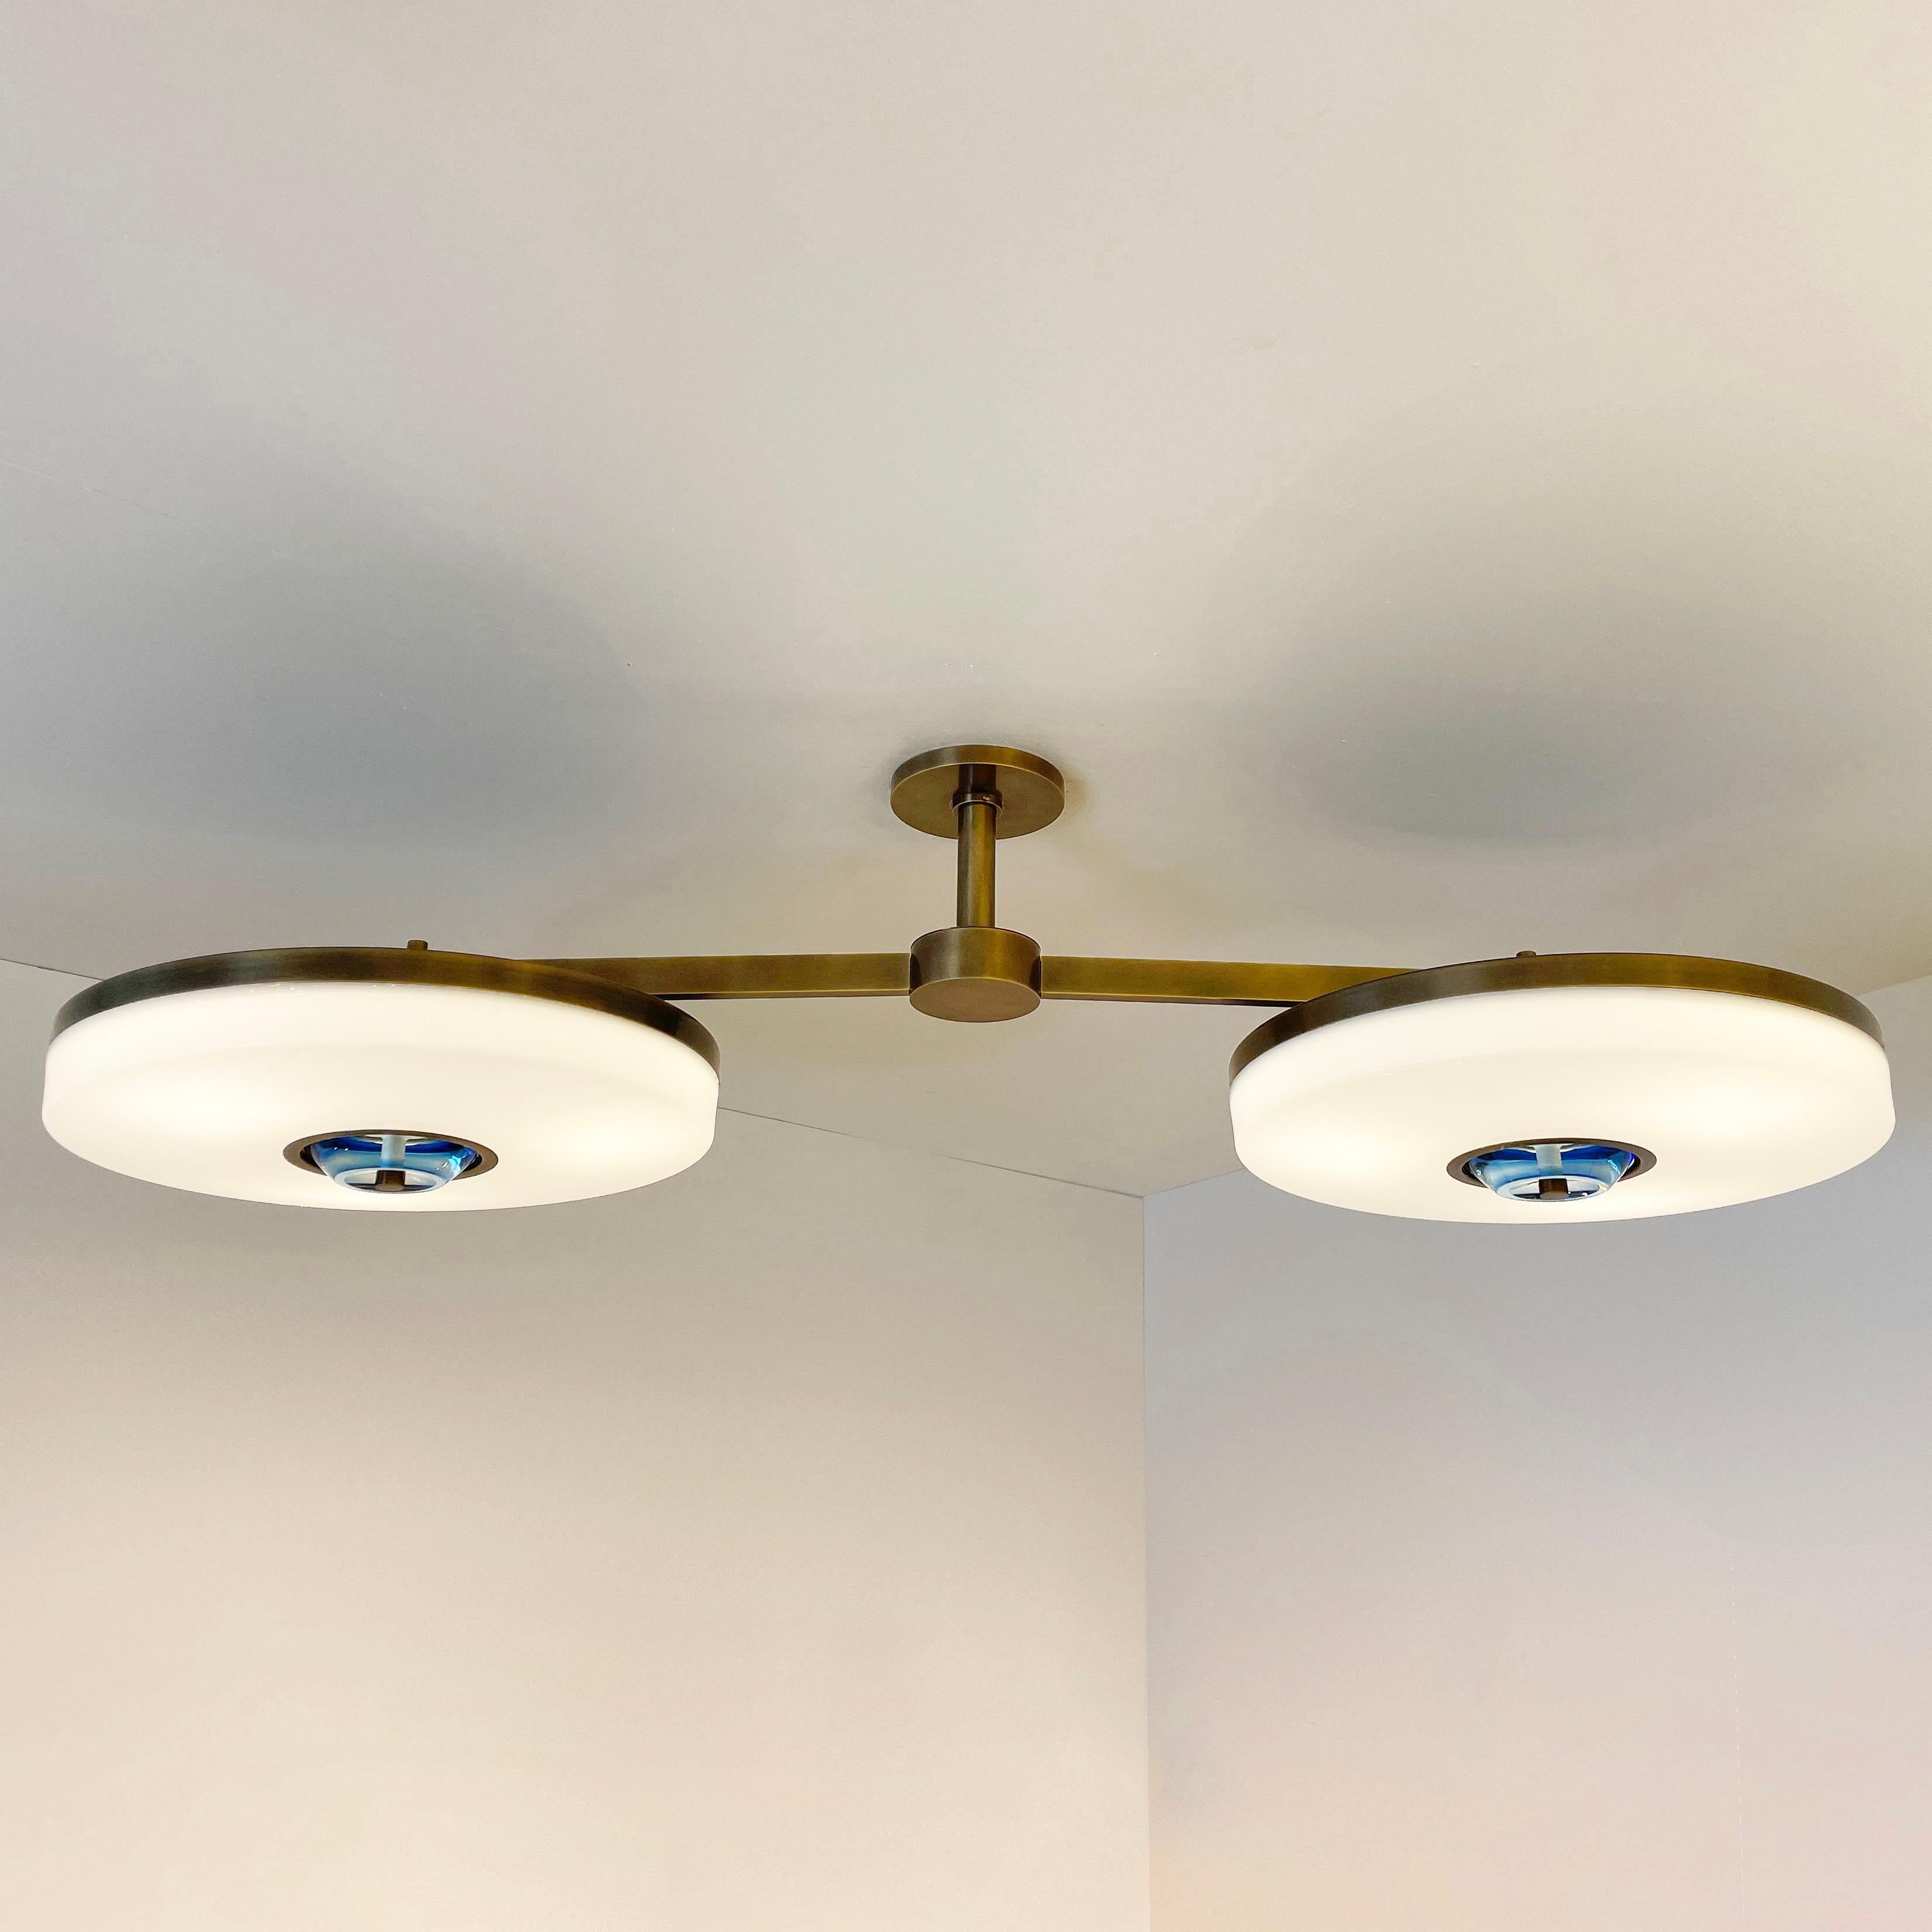 Iris N. 2 Ceiling Light by Gaspare Asaro In New Condition For Sale In New York, NY